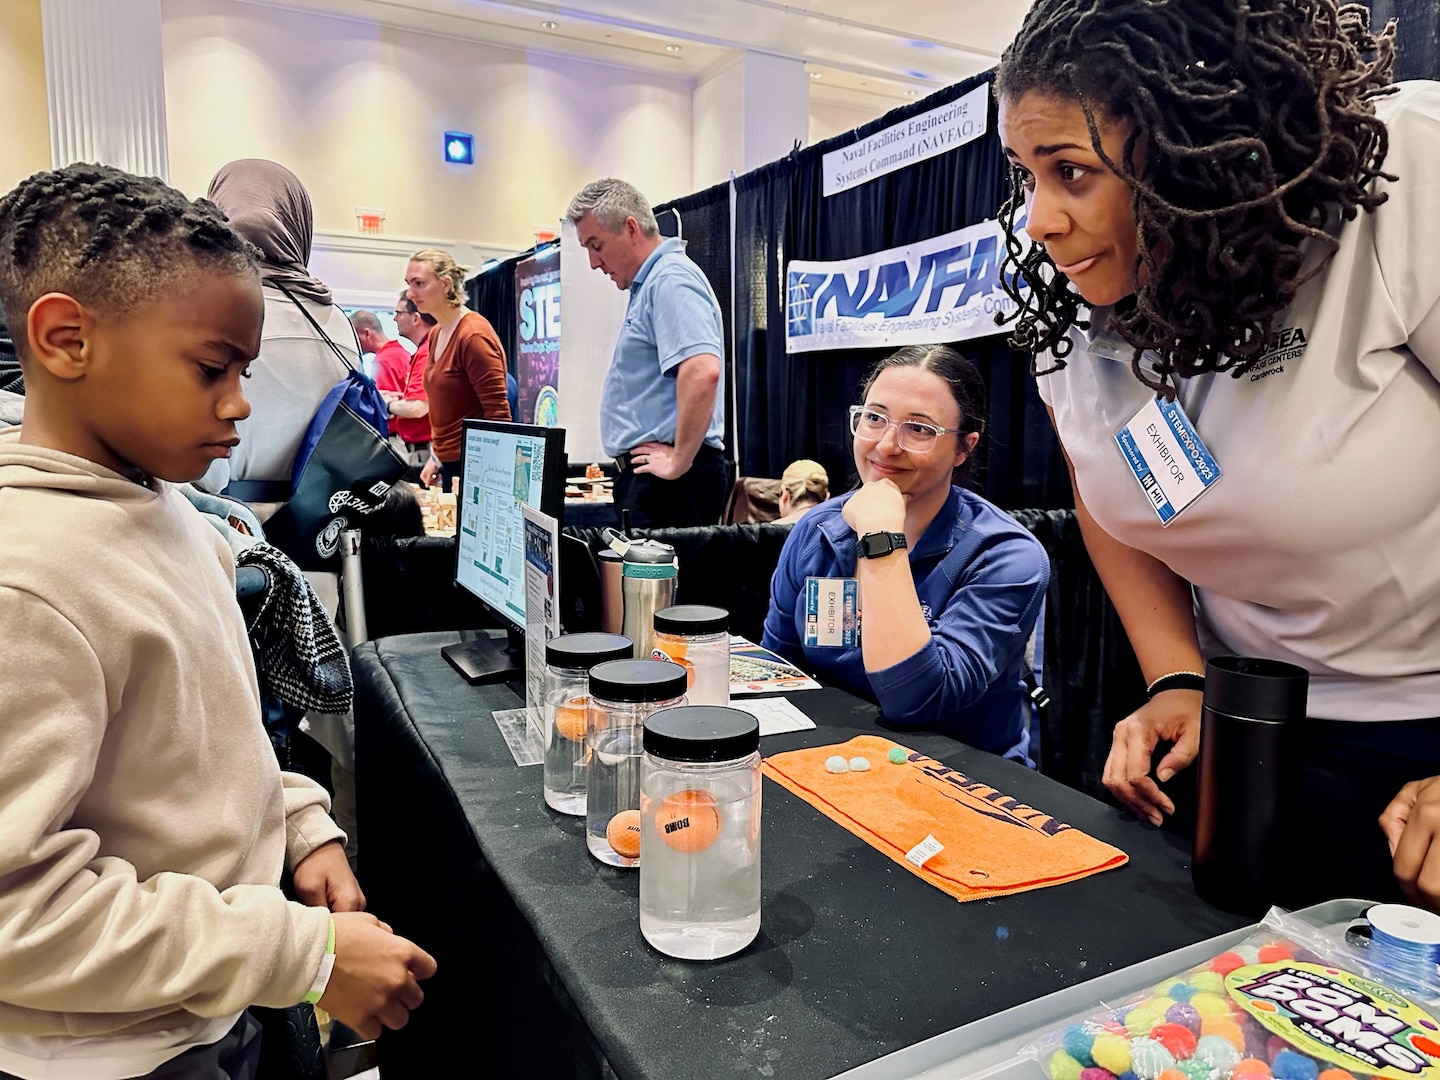 Naval Surface Warfare Center, Carderock Division engineers Charlotte George and Ashlee Floyd showcase STEM-in-a-Box activities on topics such as buoyancy and drag to a packed house during the Office of Naval Research STEM event to kick off Sea-Air-Space 2023 at the Gaylord Convention Center in National Harbor, Md., on April 2. (U.S. Navy photos by Monica McCoy)